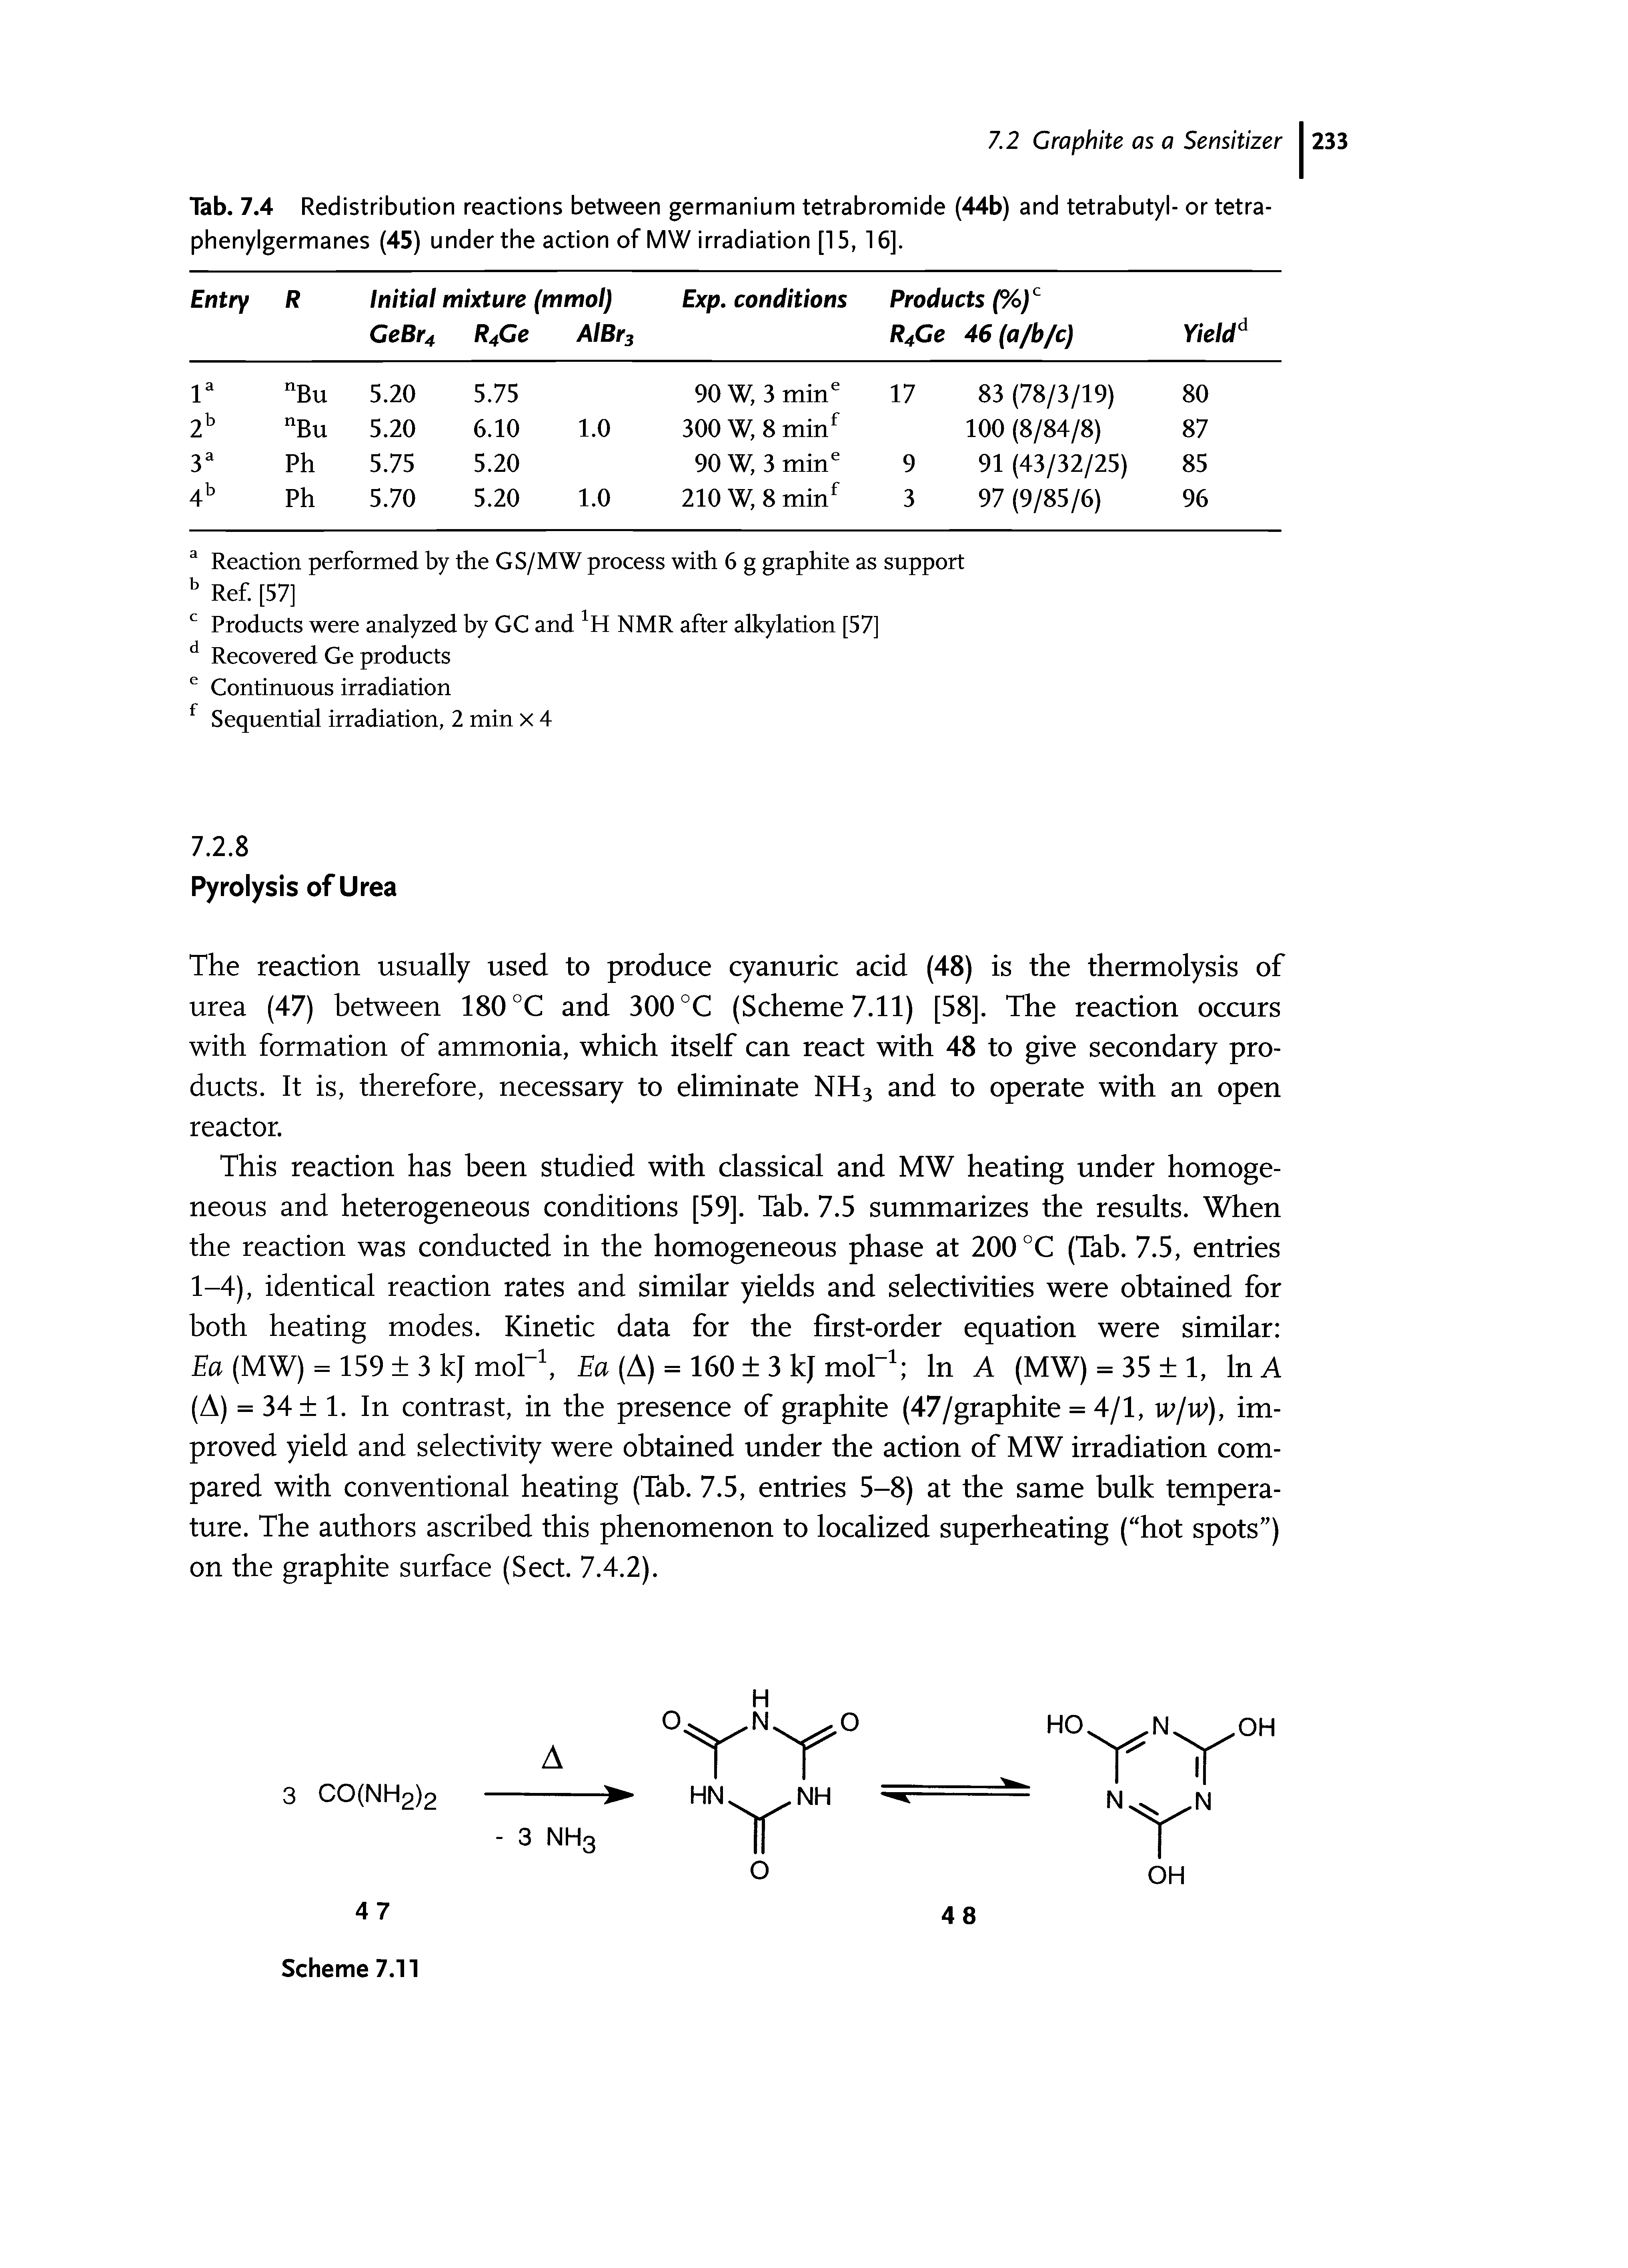 Tab. 7.4 Redistribution reactions between germanium tetrabromide (44b) and tetrabutyl- or tetra-phenylgermanes (45) under the action of MW irradiation [15, 16].